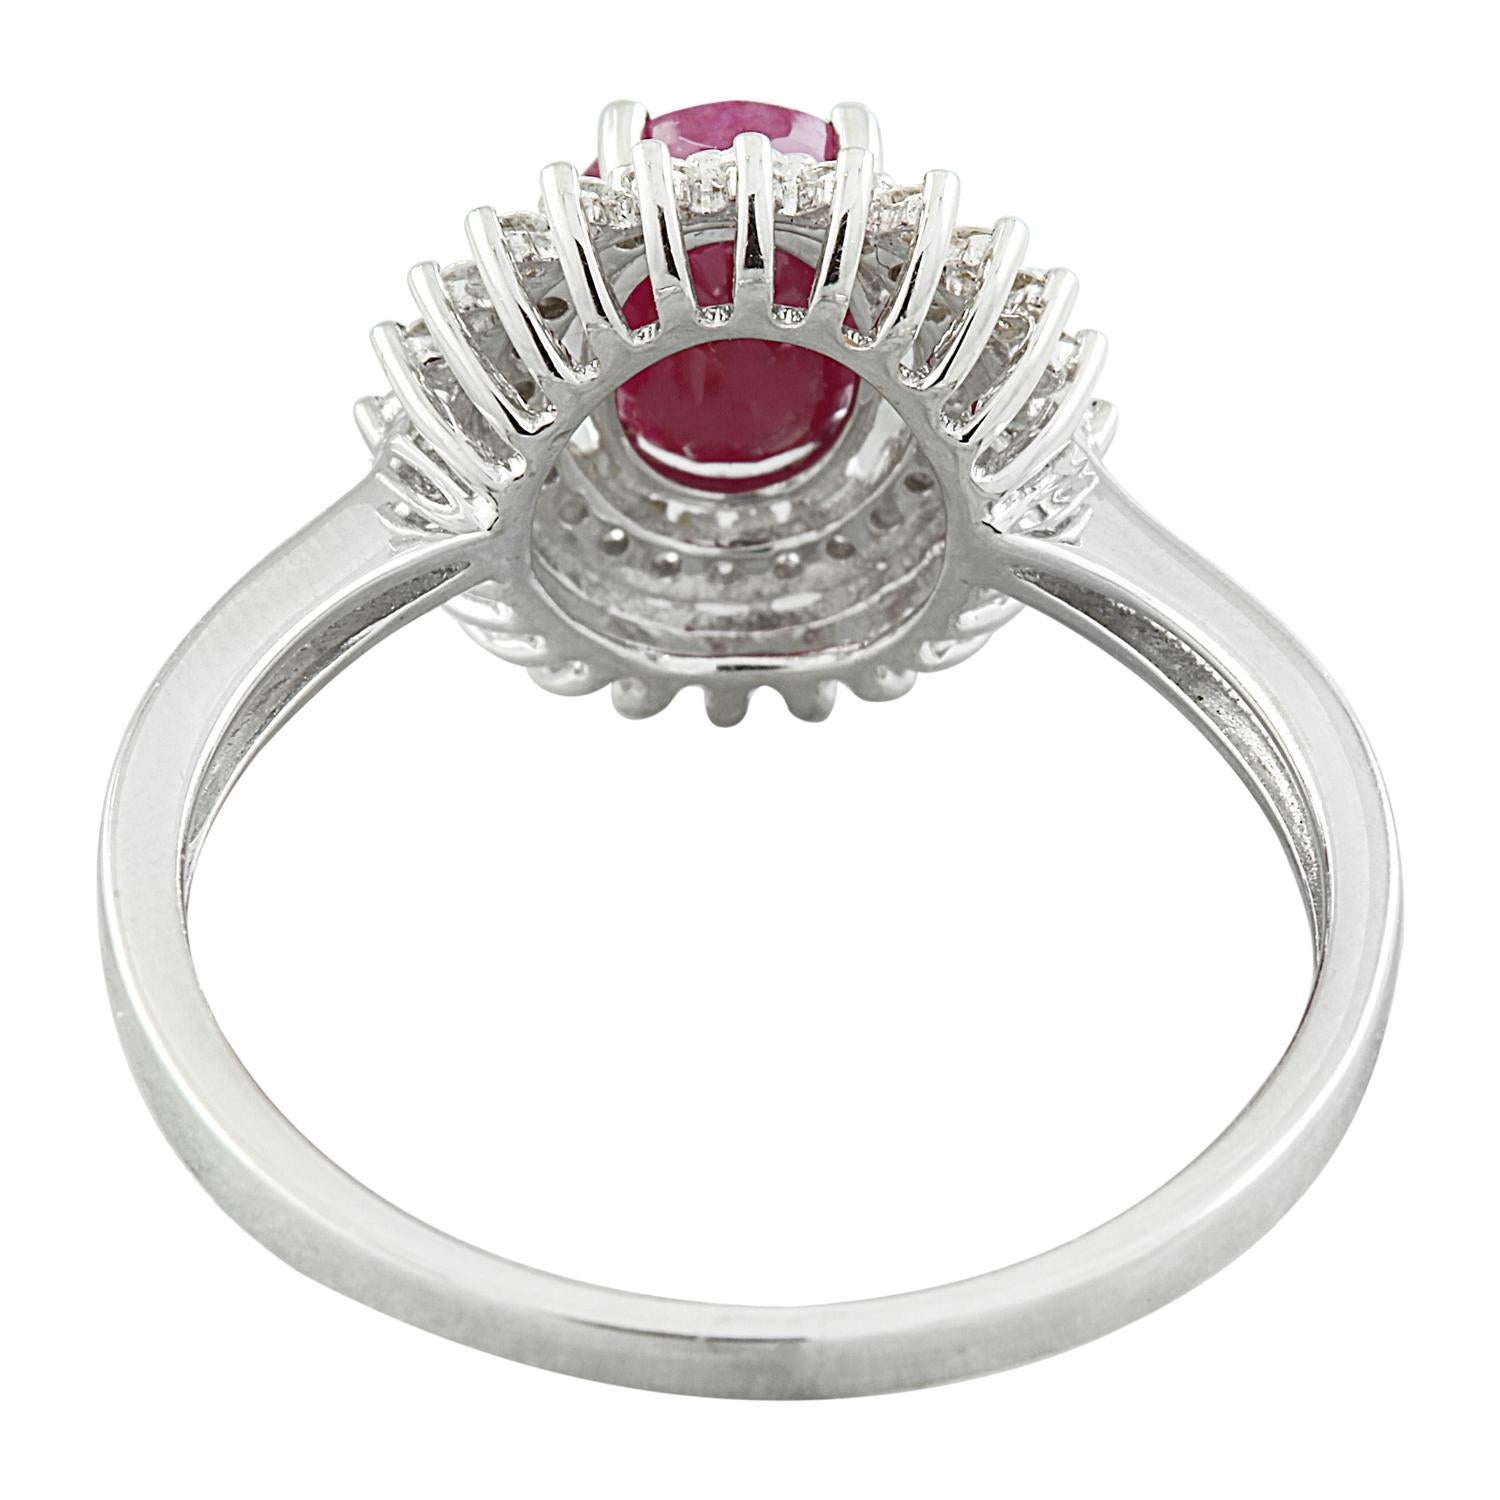 Oval Cut Natural Ruby Diamond Ring: Exquisite Beauty in 14K Solid White Gold For Sale